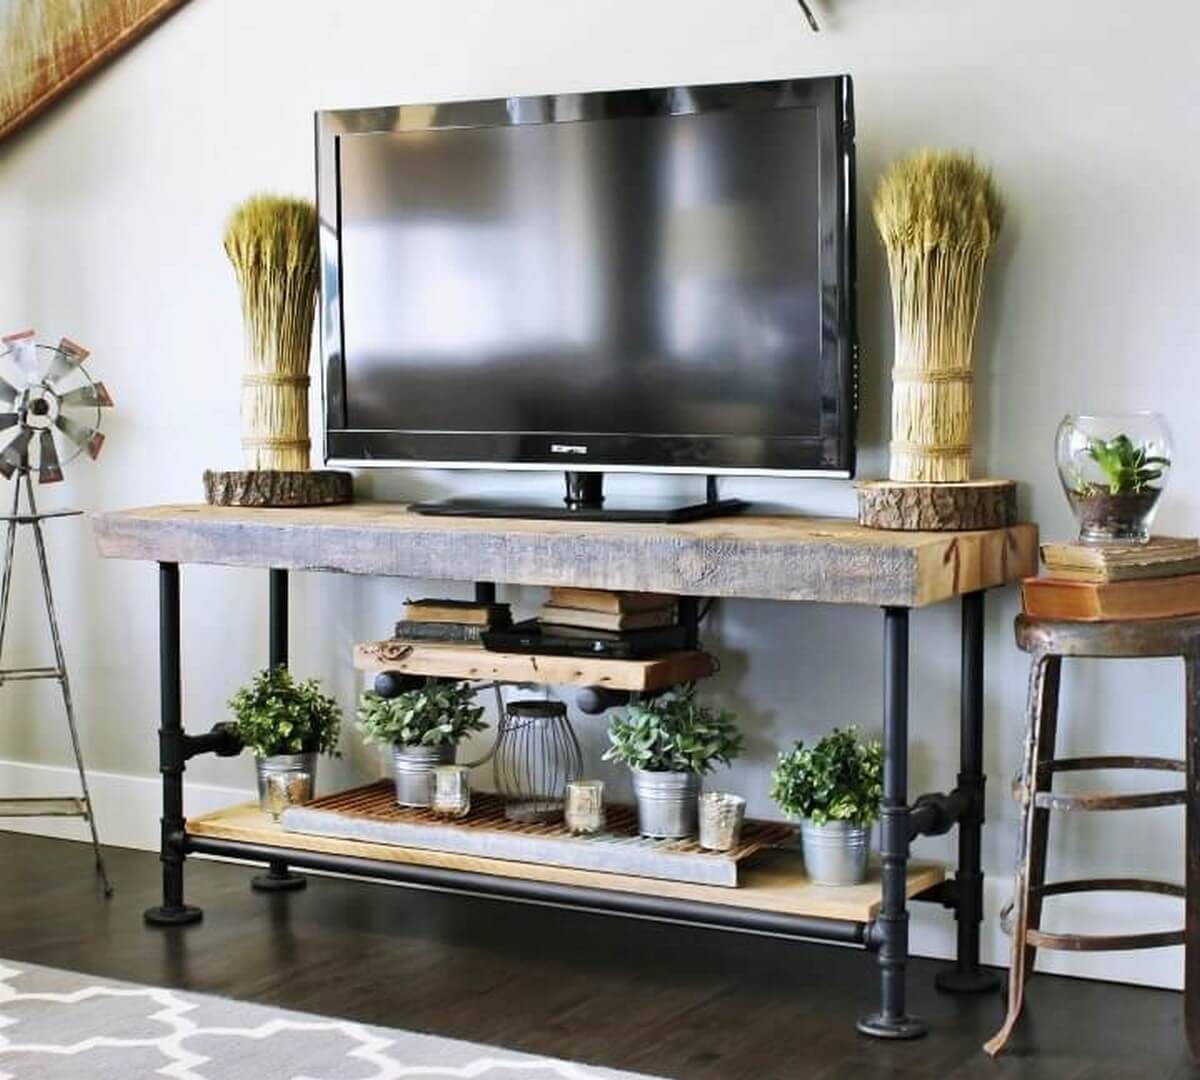 farm-tv-stand-farmhouse-style-tv-stand-farmhouse-tv-table-distressed-red-tv-stand-wooden-retro-tv-stand